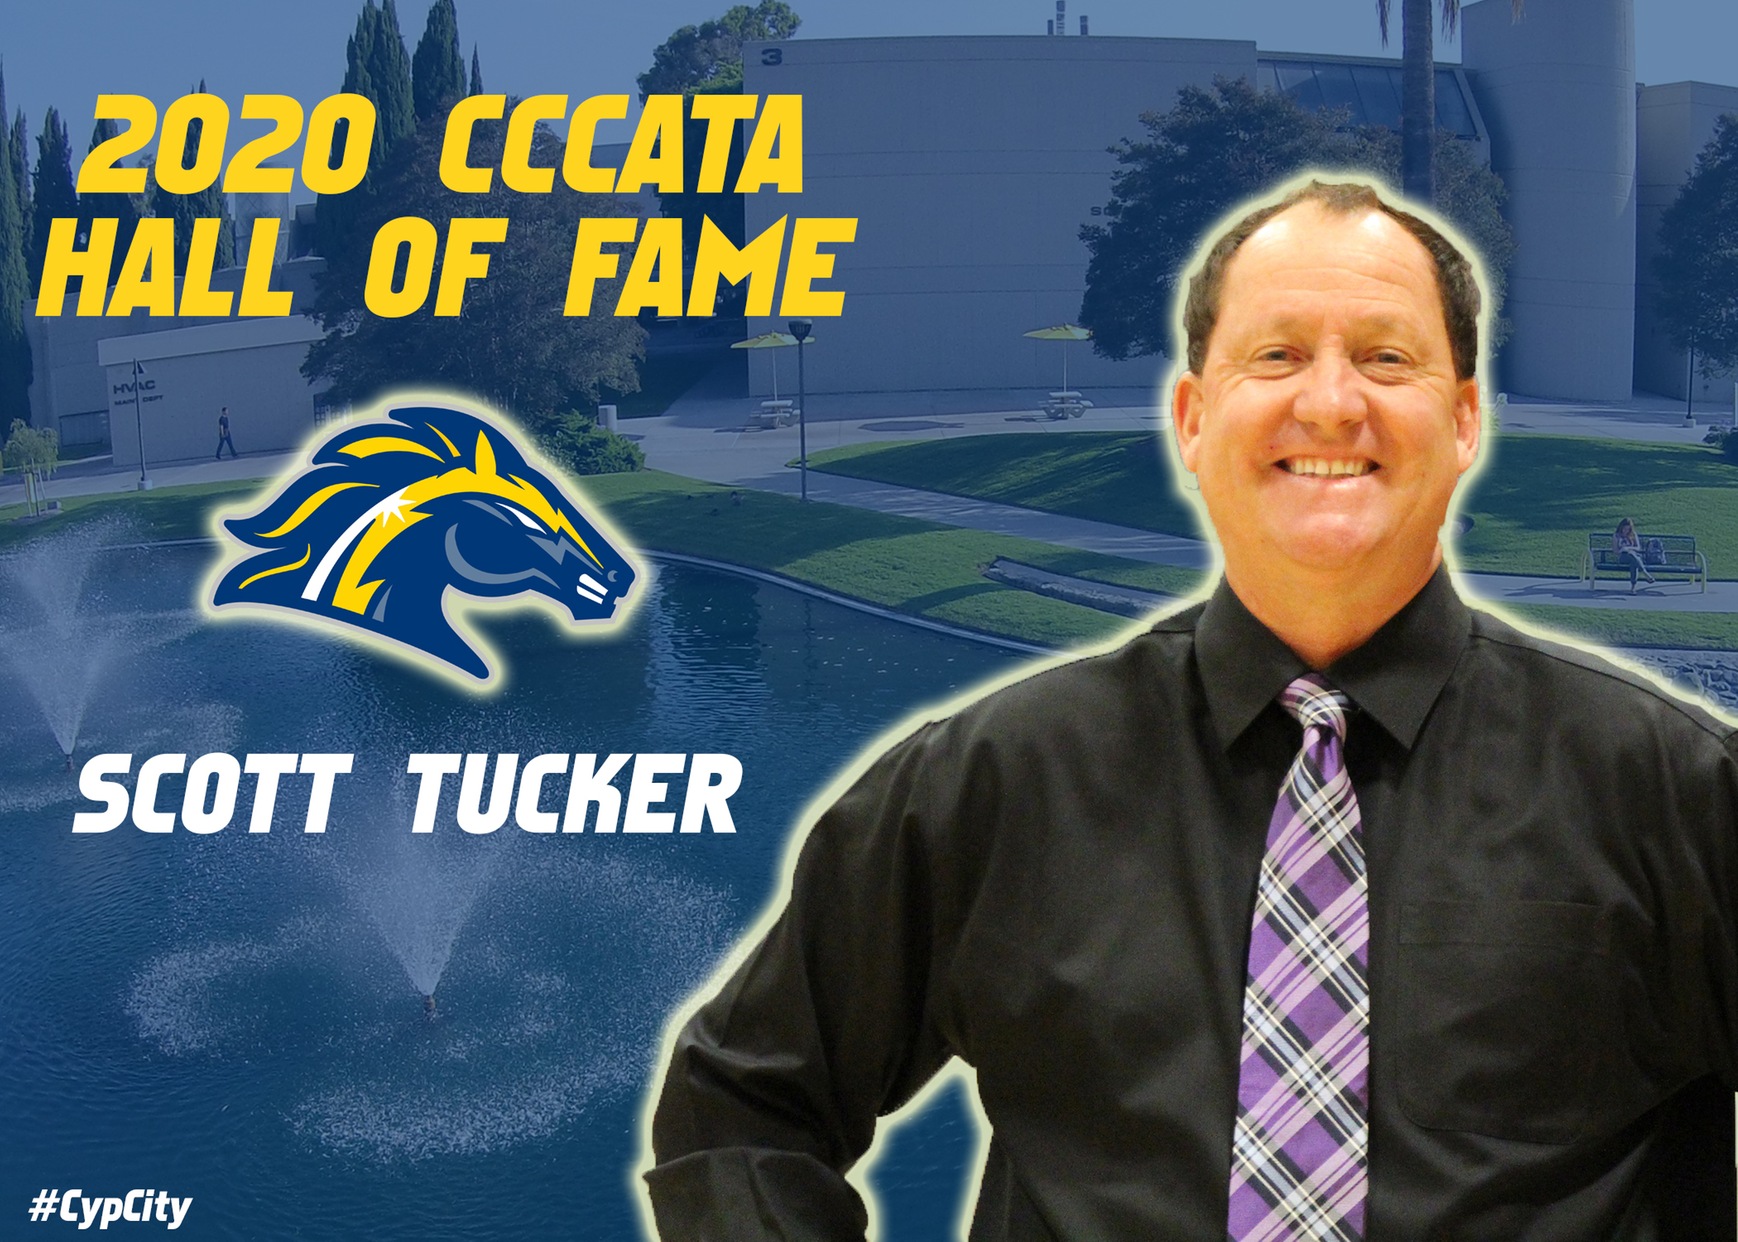 Head Athletic Trainer, Scott Tucker, Inducted into the CCCATA Hall of Fame